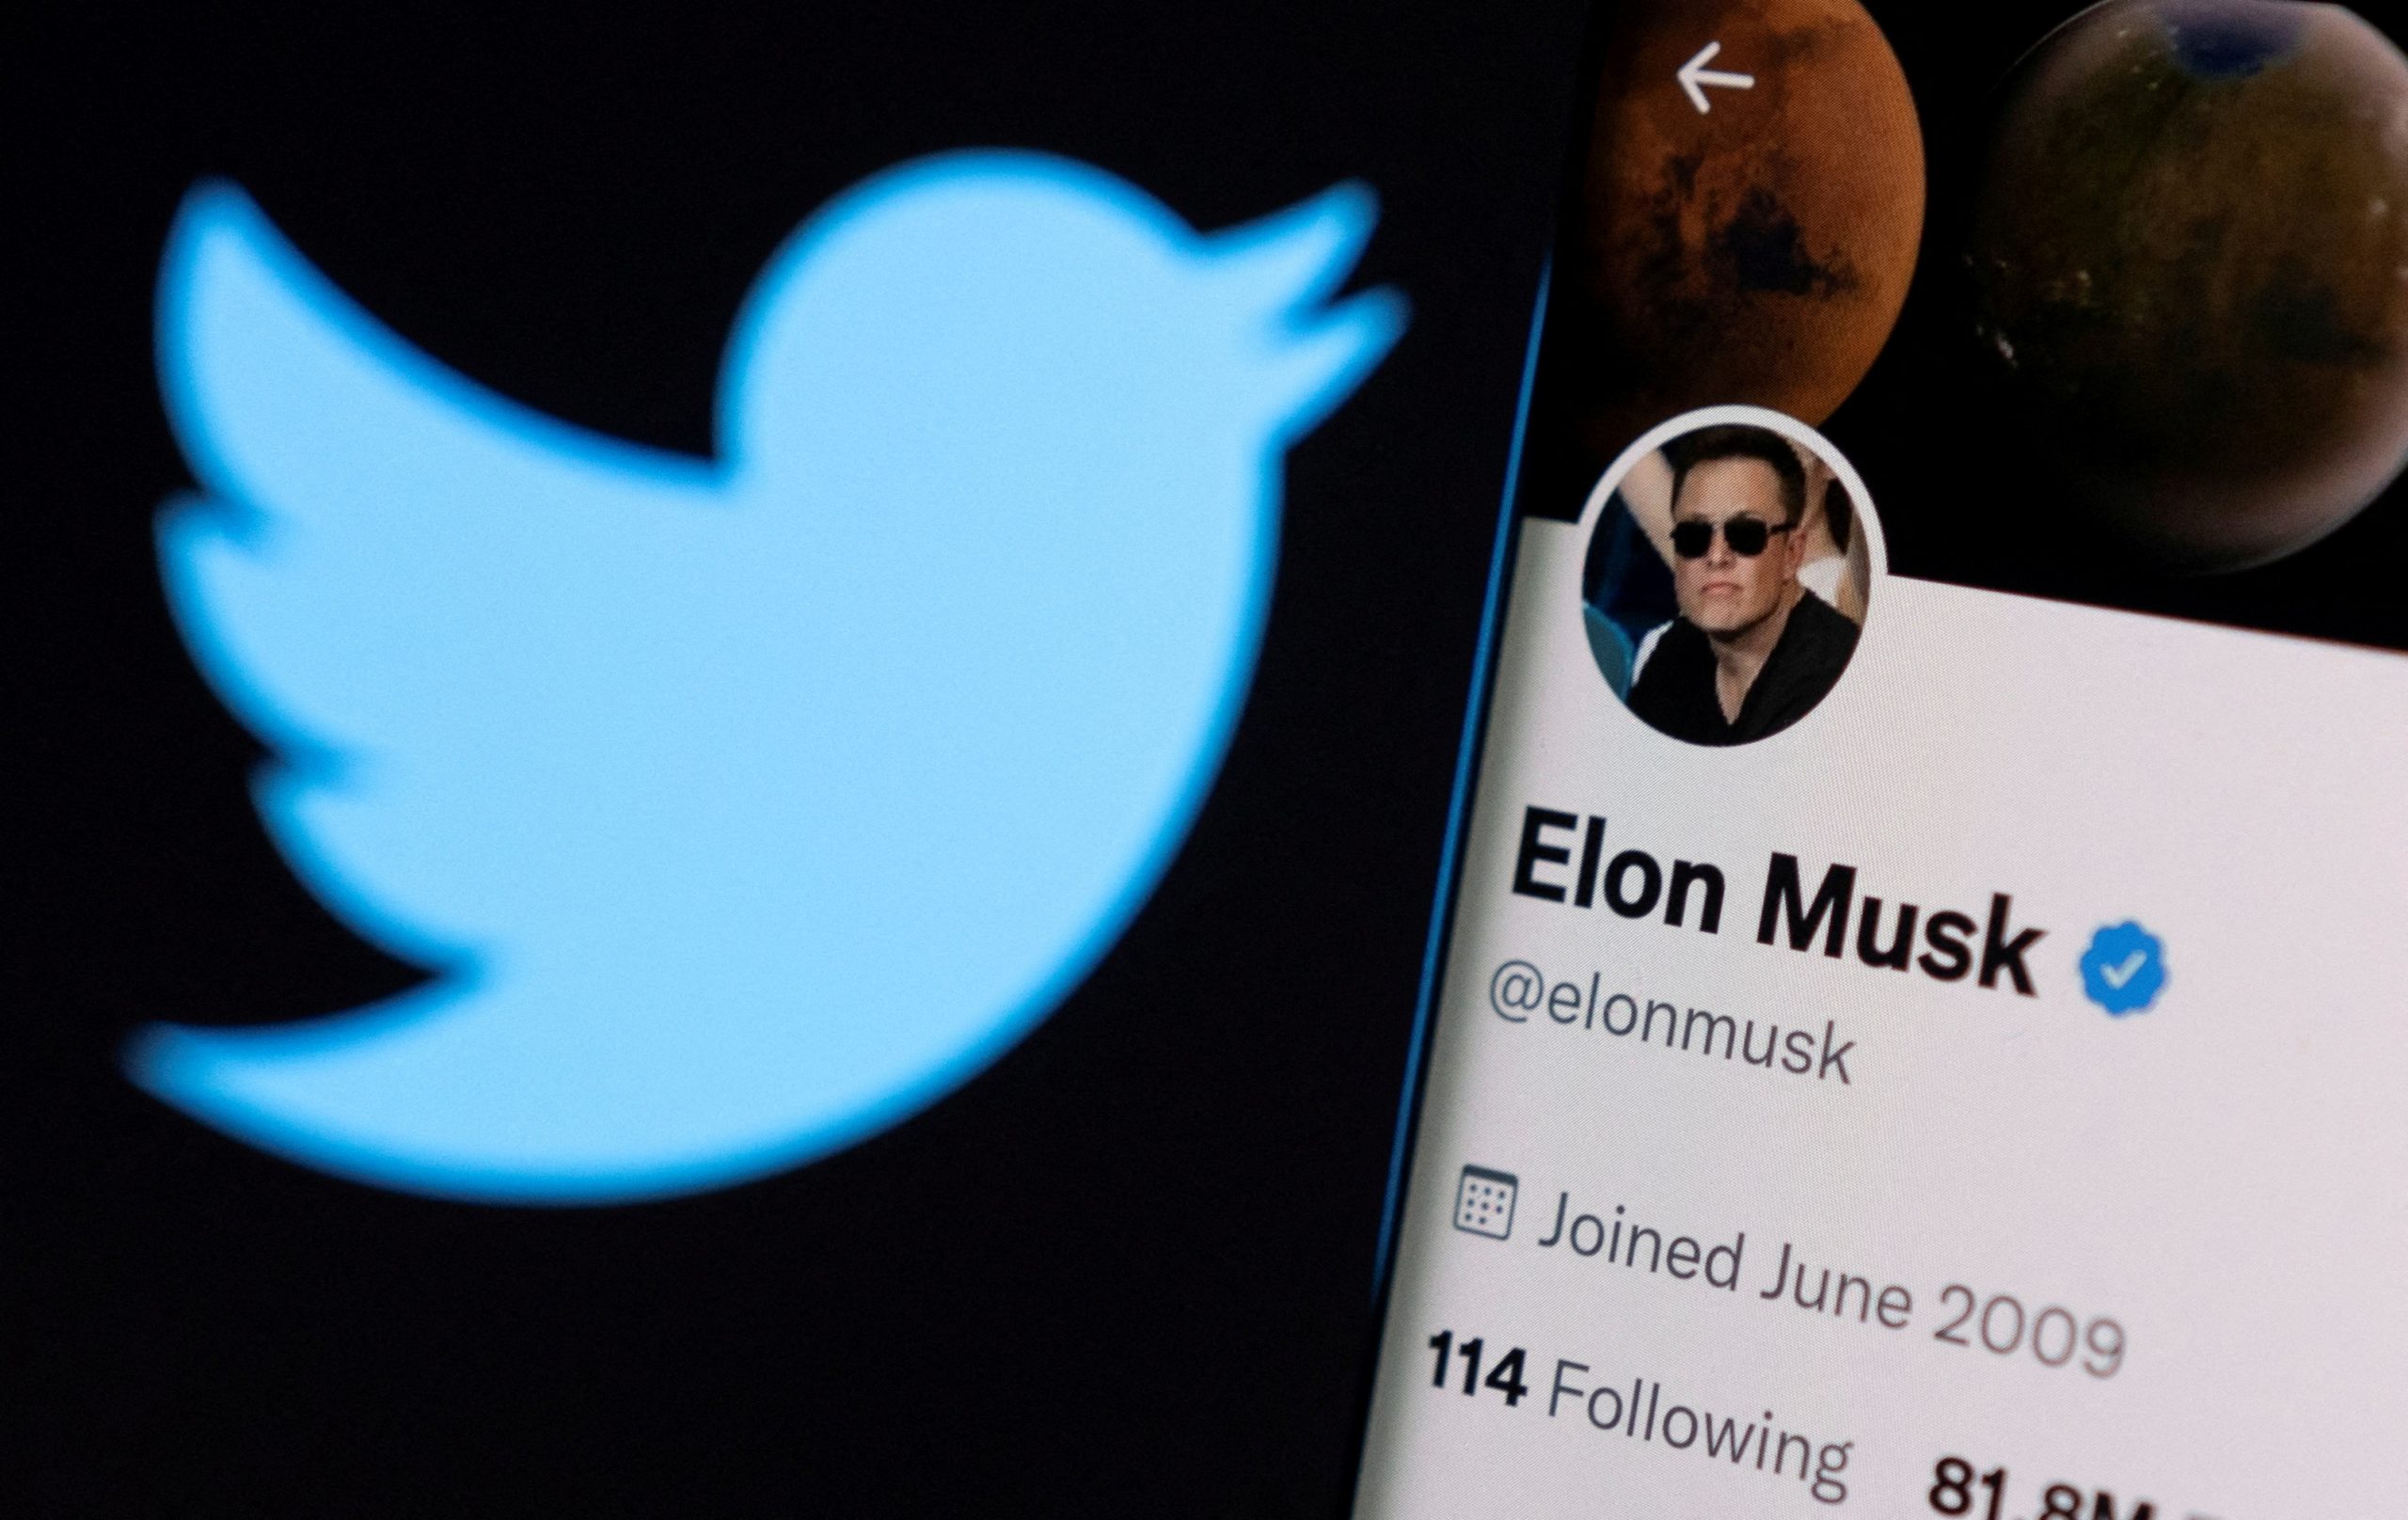 What to expect as Elon Musk bids to buy Twitter for $43 billion